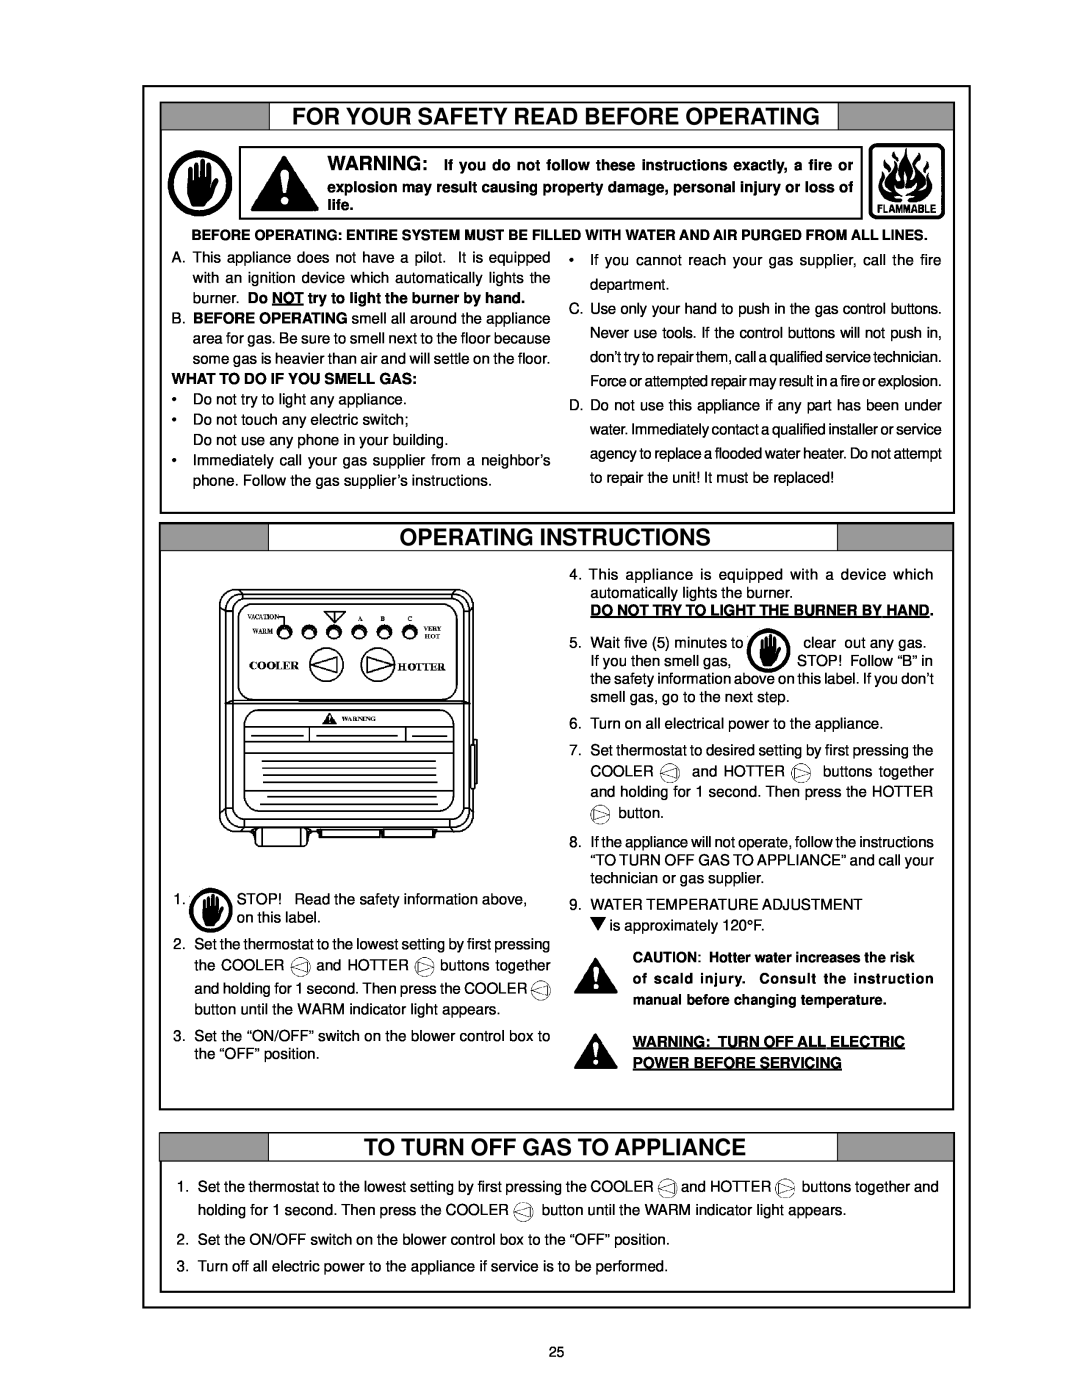 A.O. Smith ARGSS02708 For Your Safety Read Before Operating, Operating Instructions, To Turn Off Gas To Appliance 